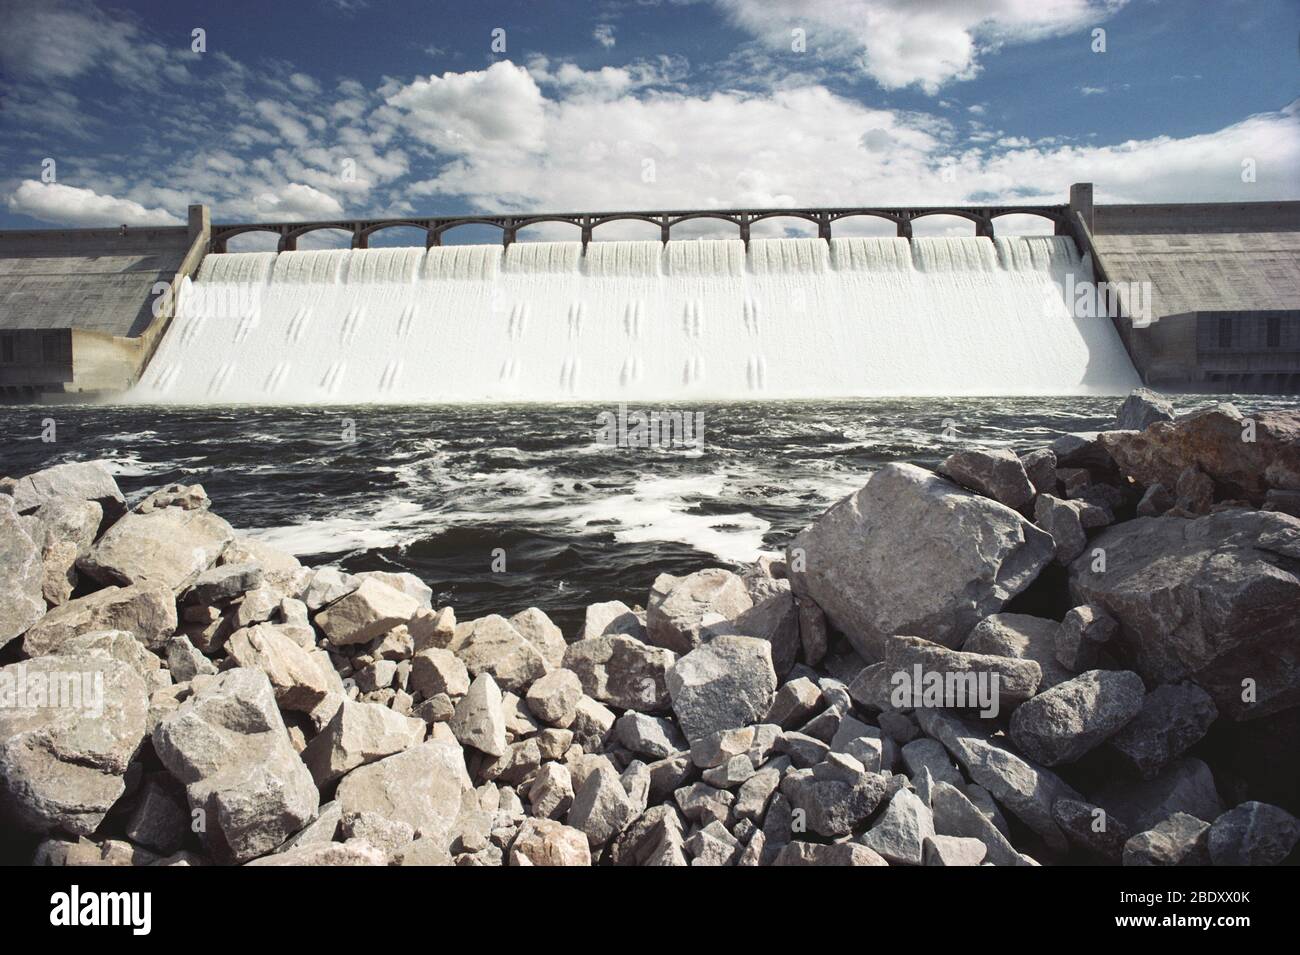 Grand-Coulee-Talsperre Stockfoto